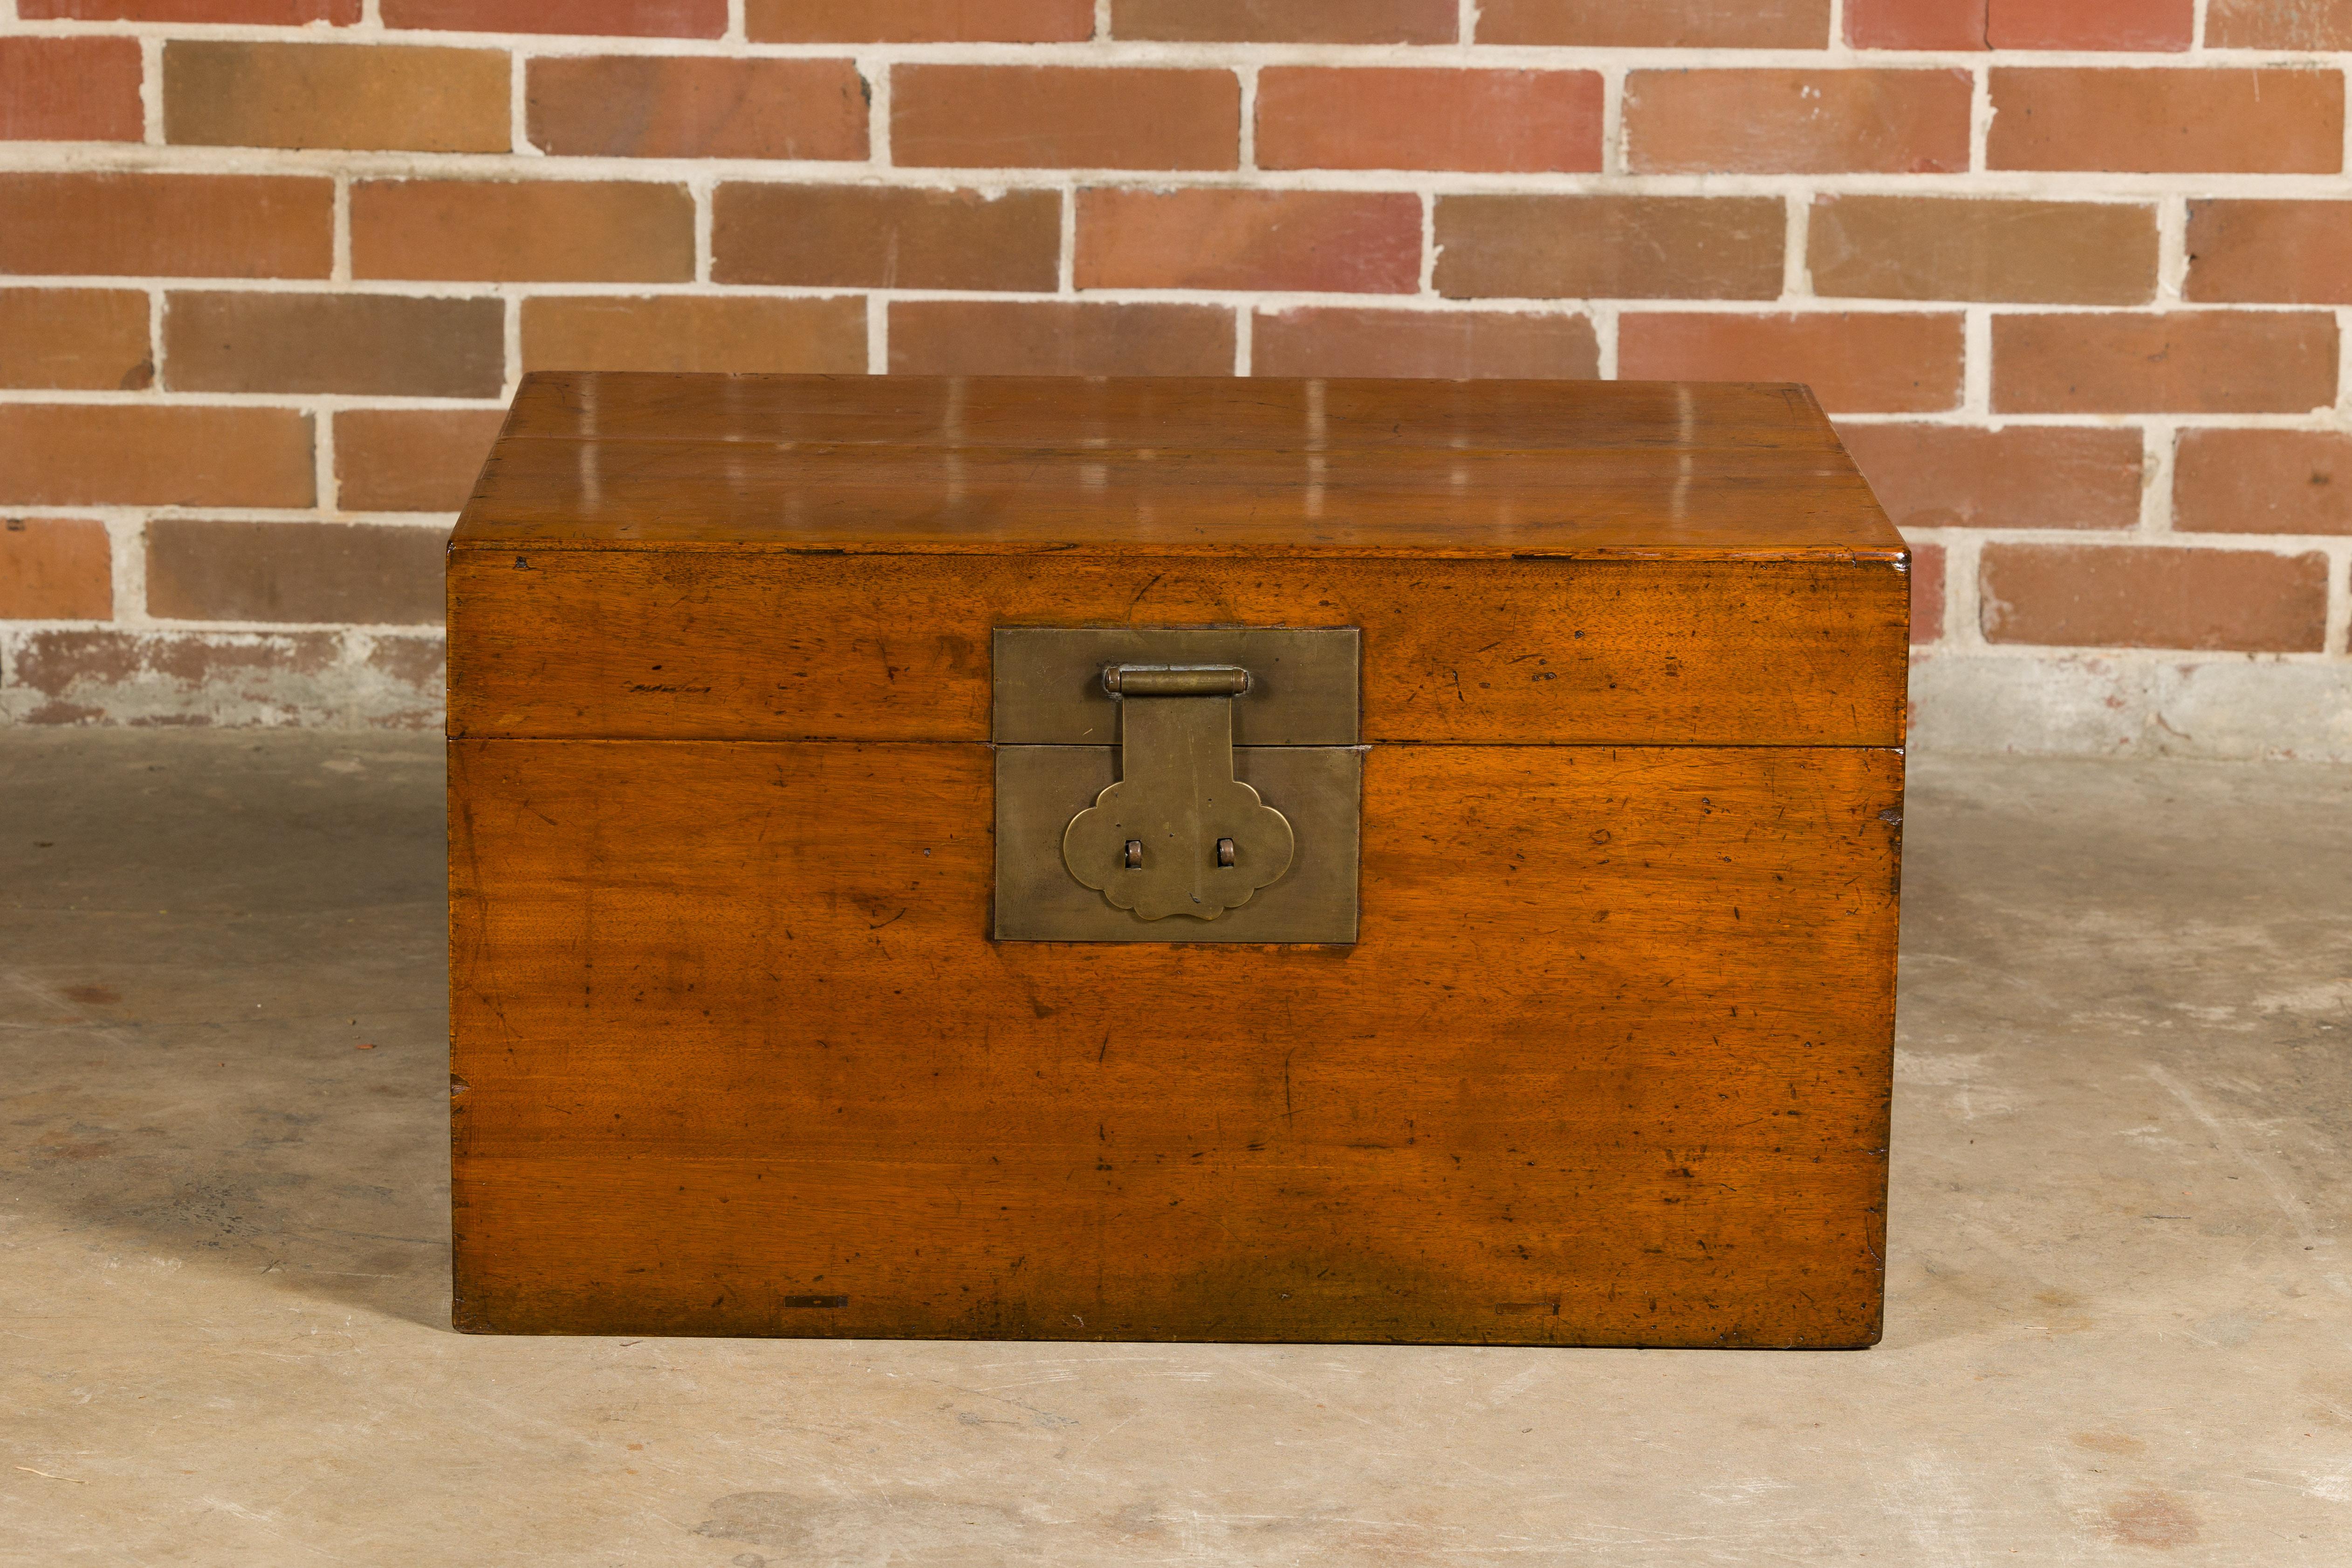 An oak or teak blanket chest from the 19th century with traditional brass lock, lateral handle and dovetail construction. Exuding an undeniable charm from the 19th century, this oak or teak blanket chest serves as a captivating blend of function and